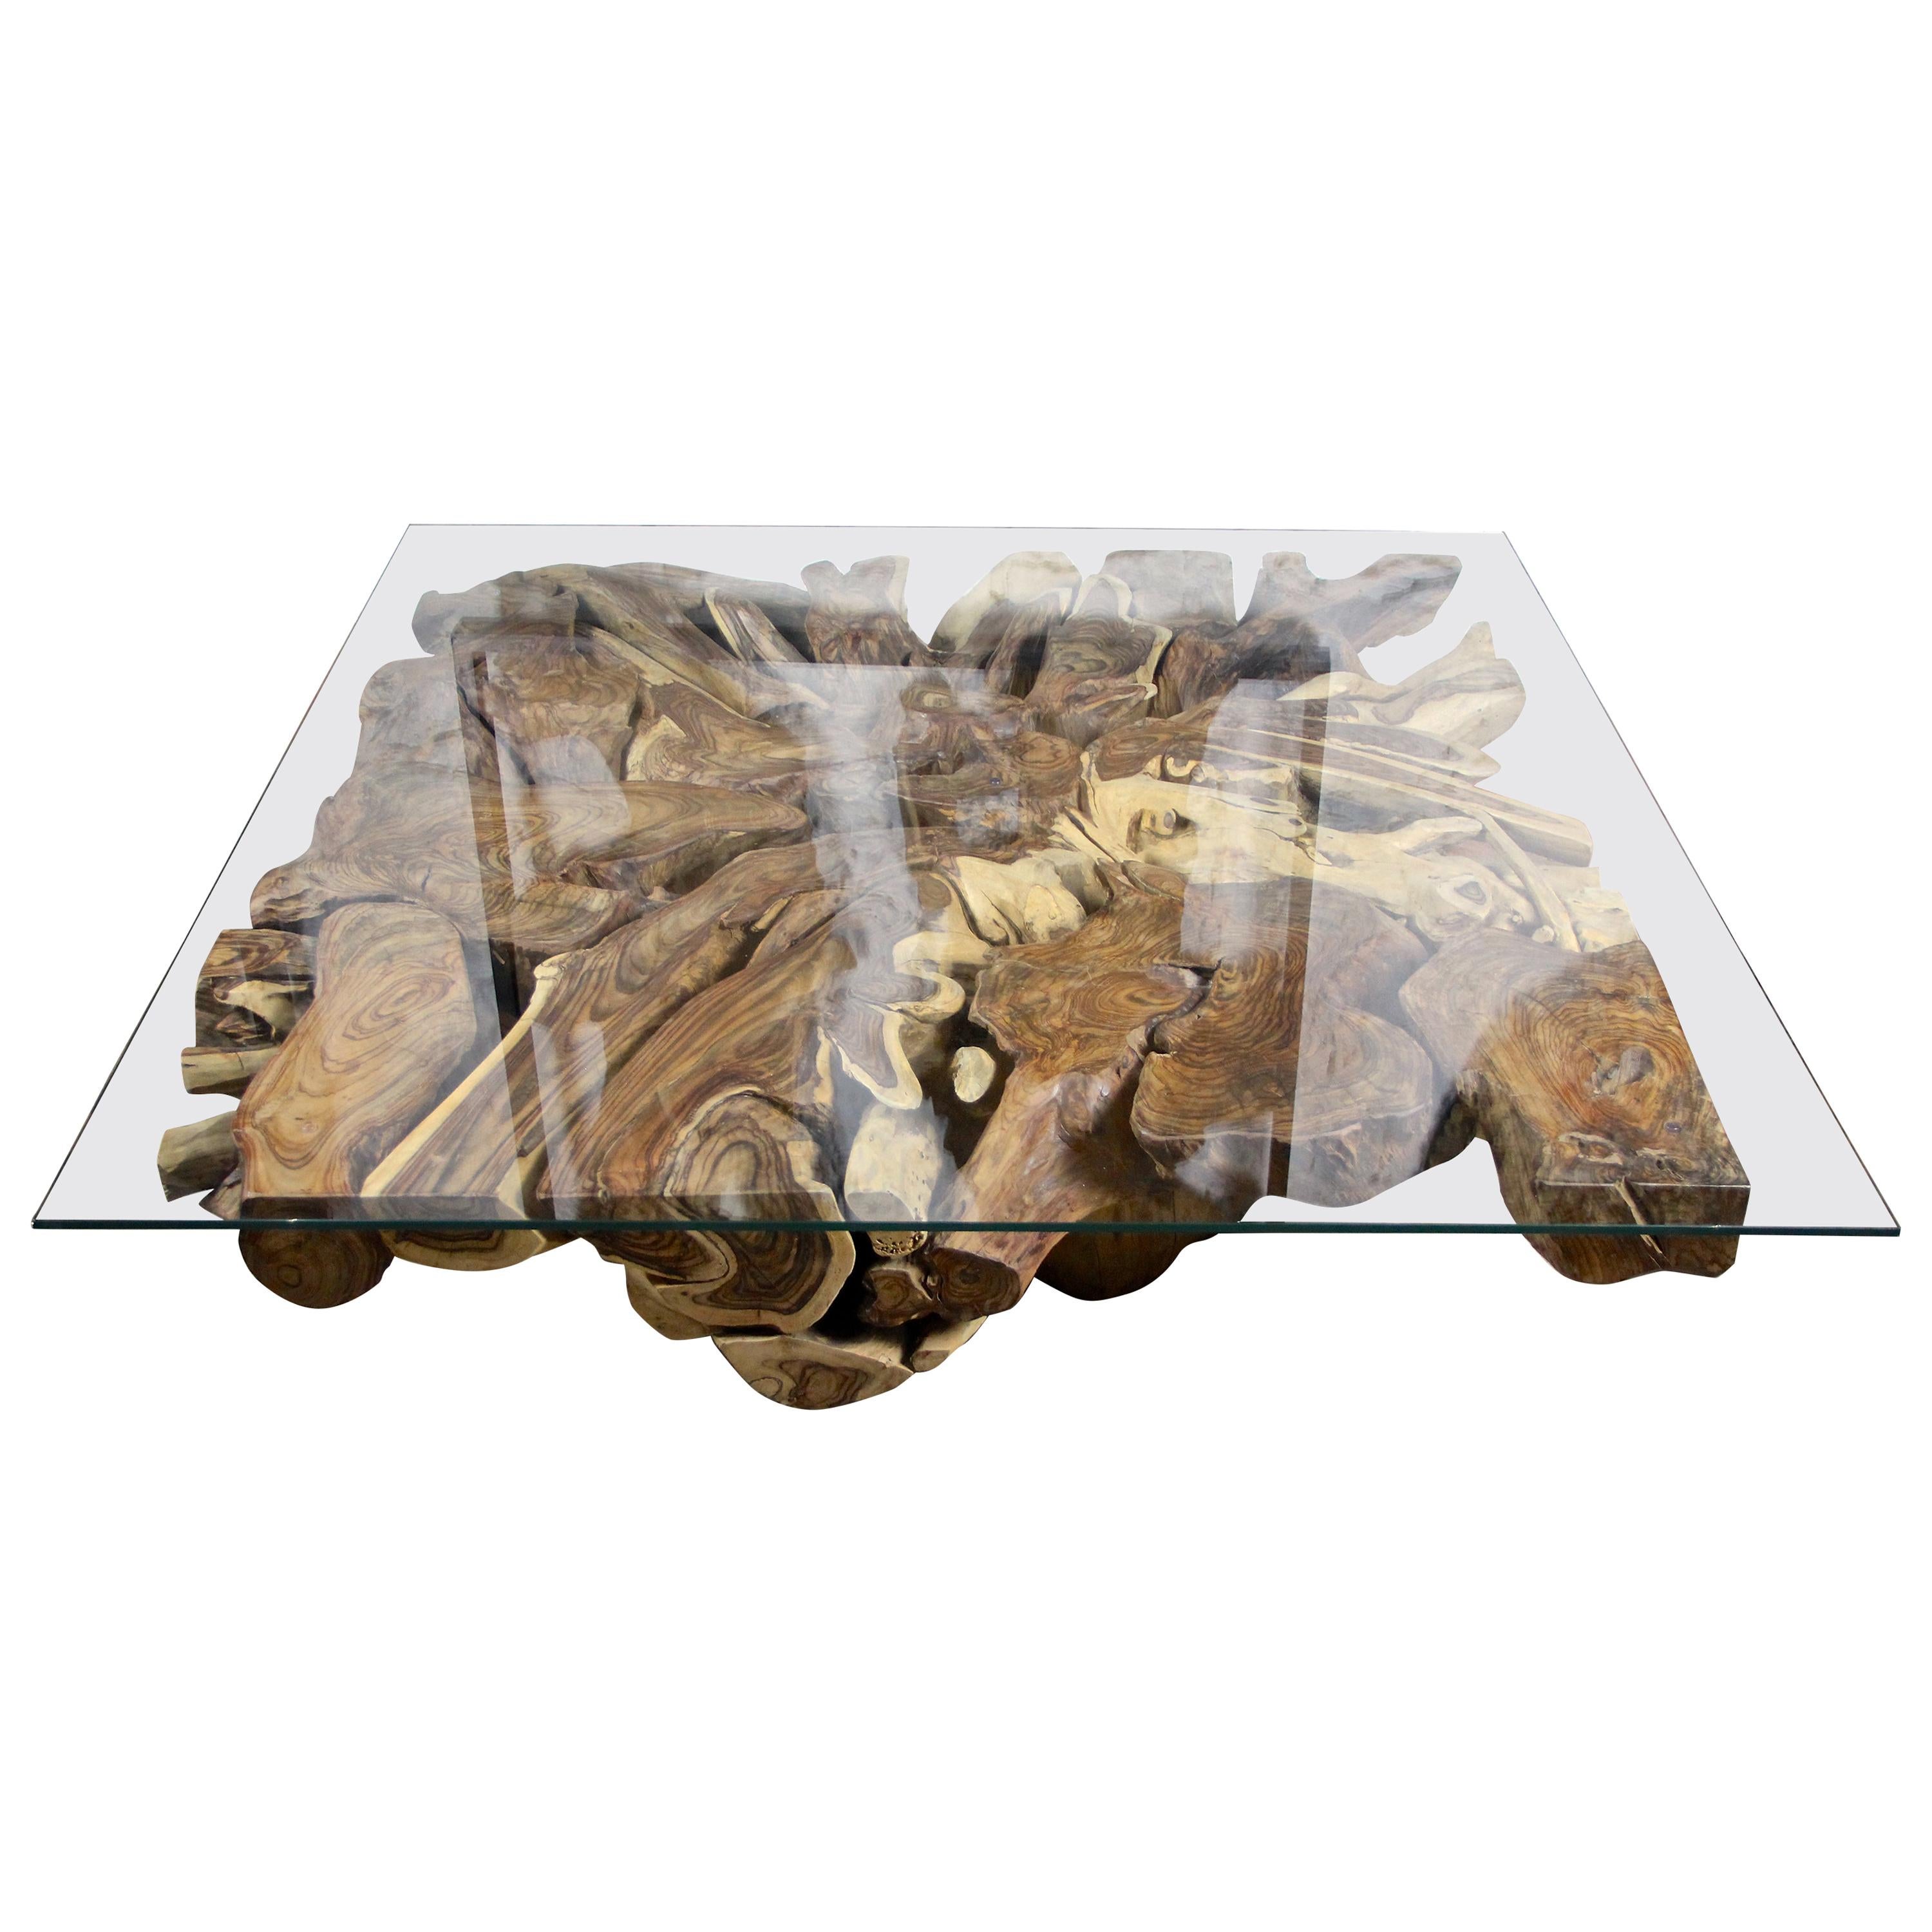 Organic Sonokeling Wood Root Table with Safety Glass Table Top